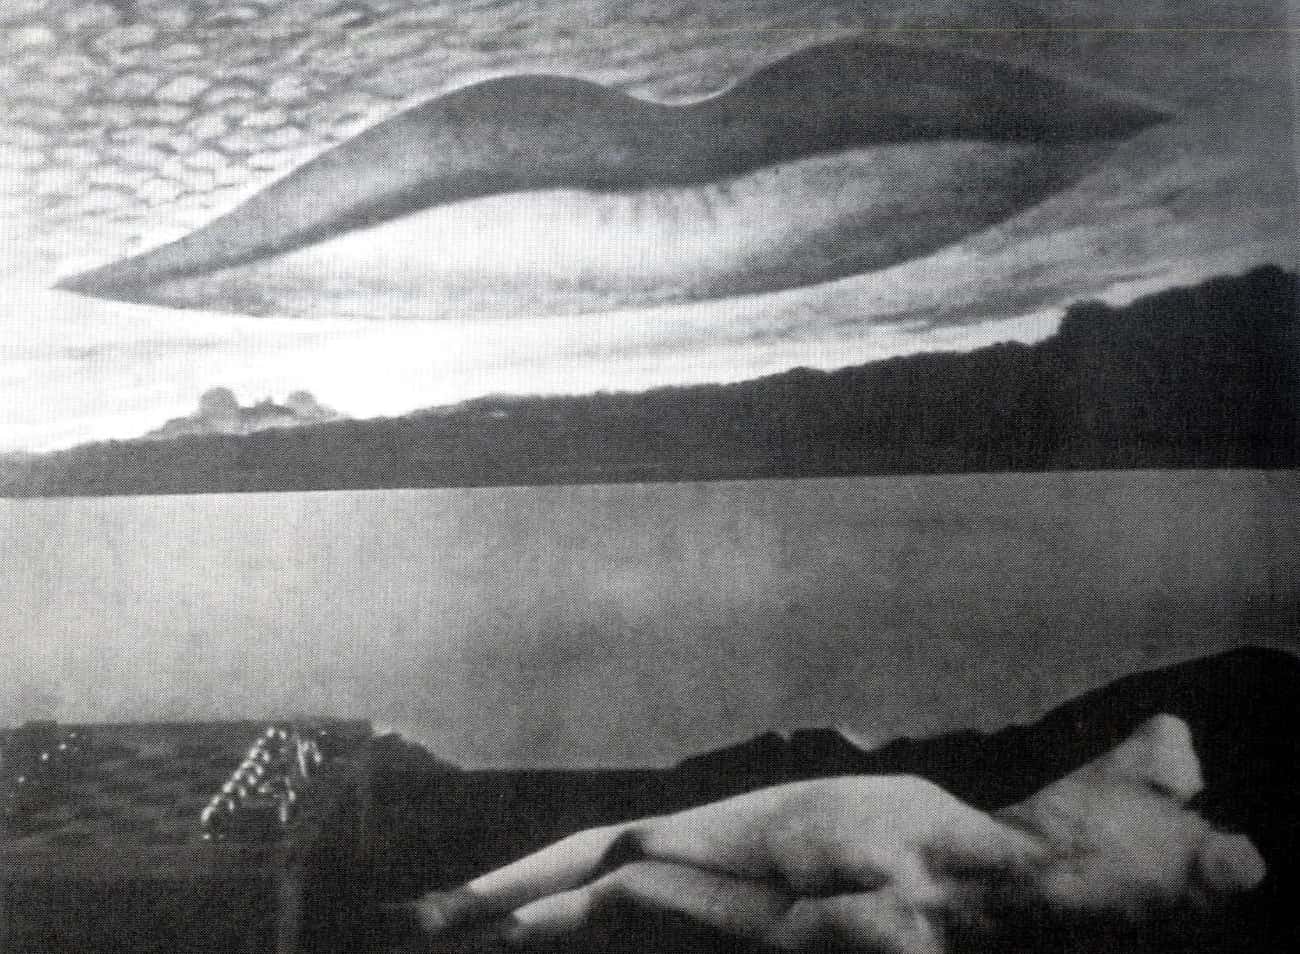 Elizabeth Short's Murder Has A Connection To The Surrealist Man Ray, Whom George Hodel Idolized 